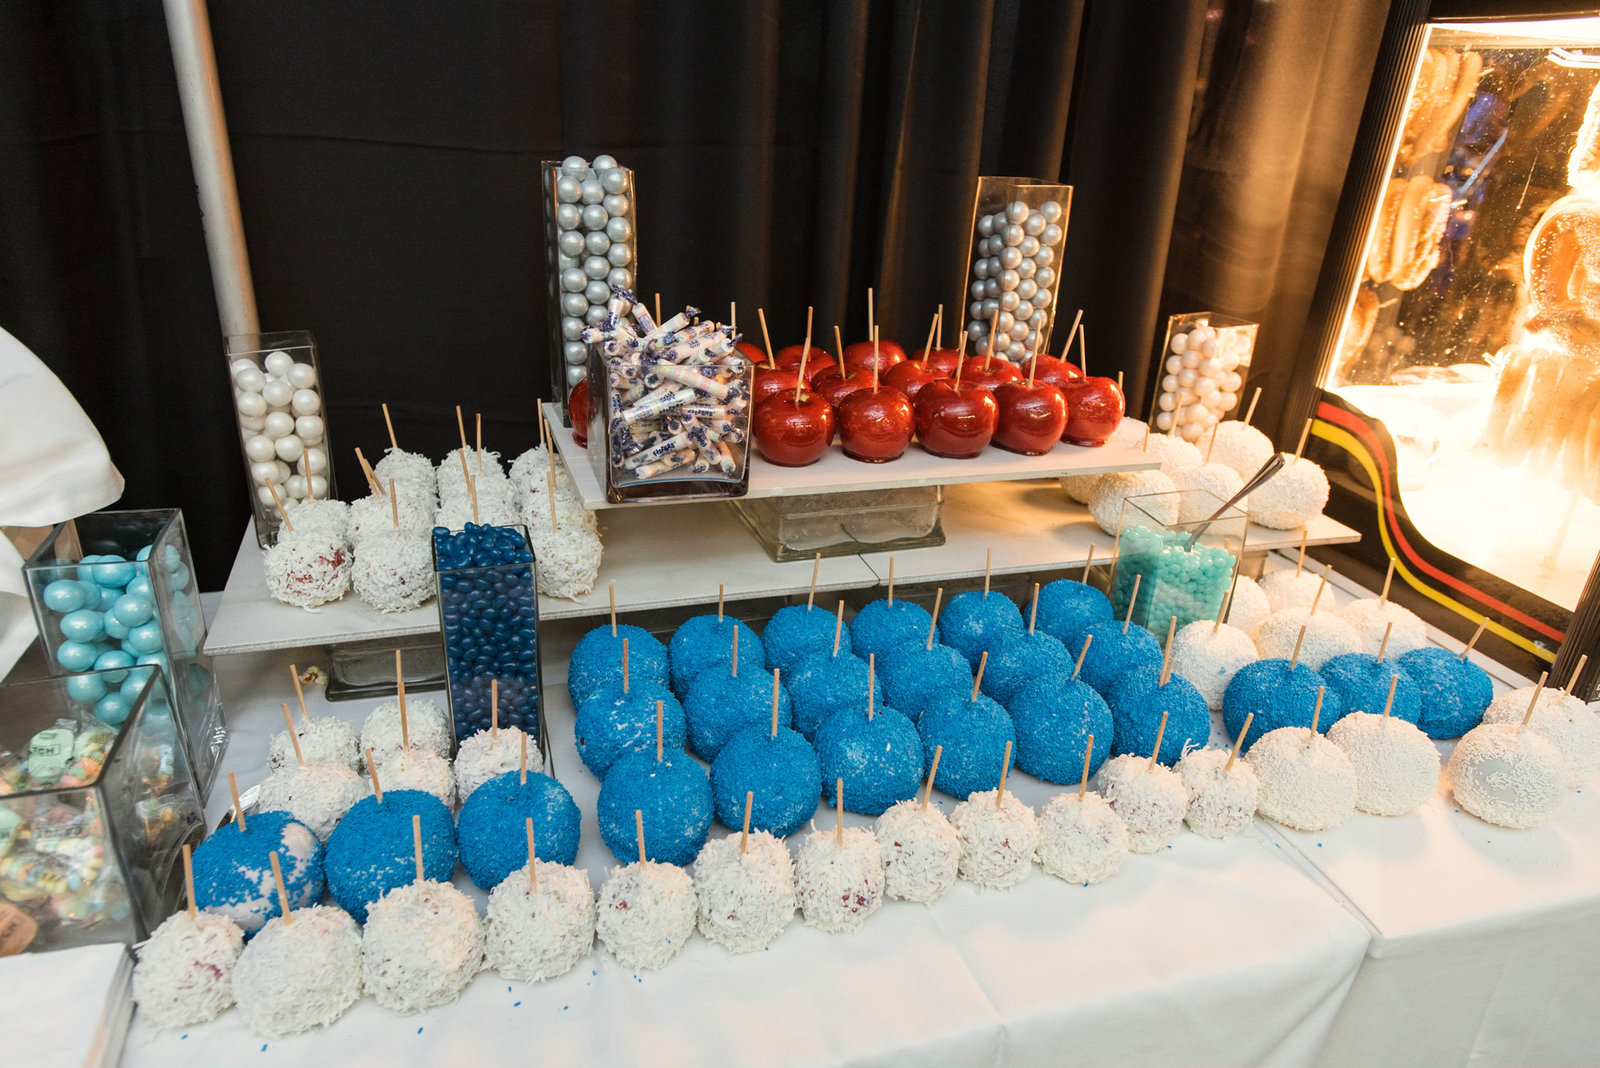 Candy apple dessert table at Cradle of Aviation